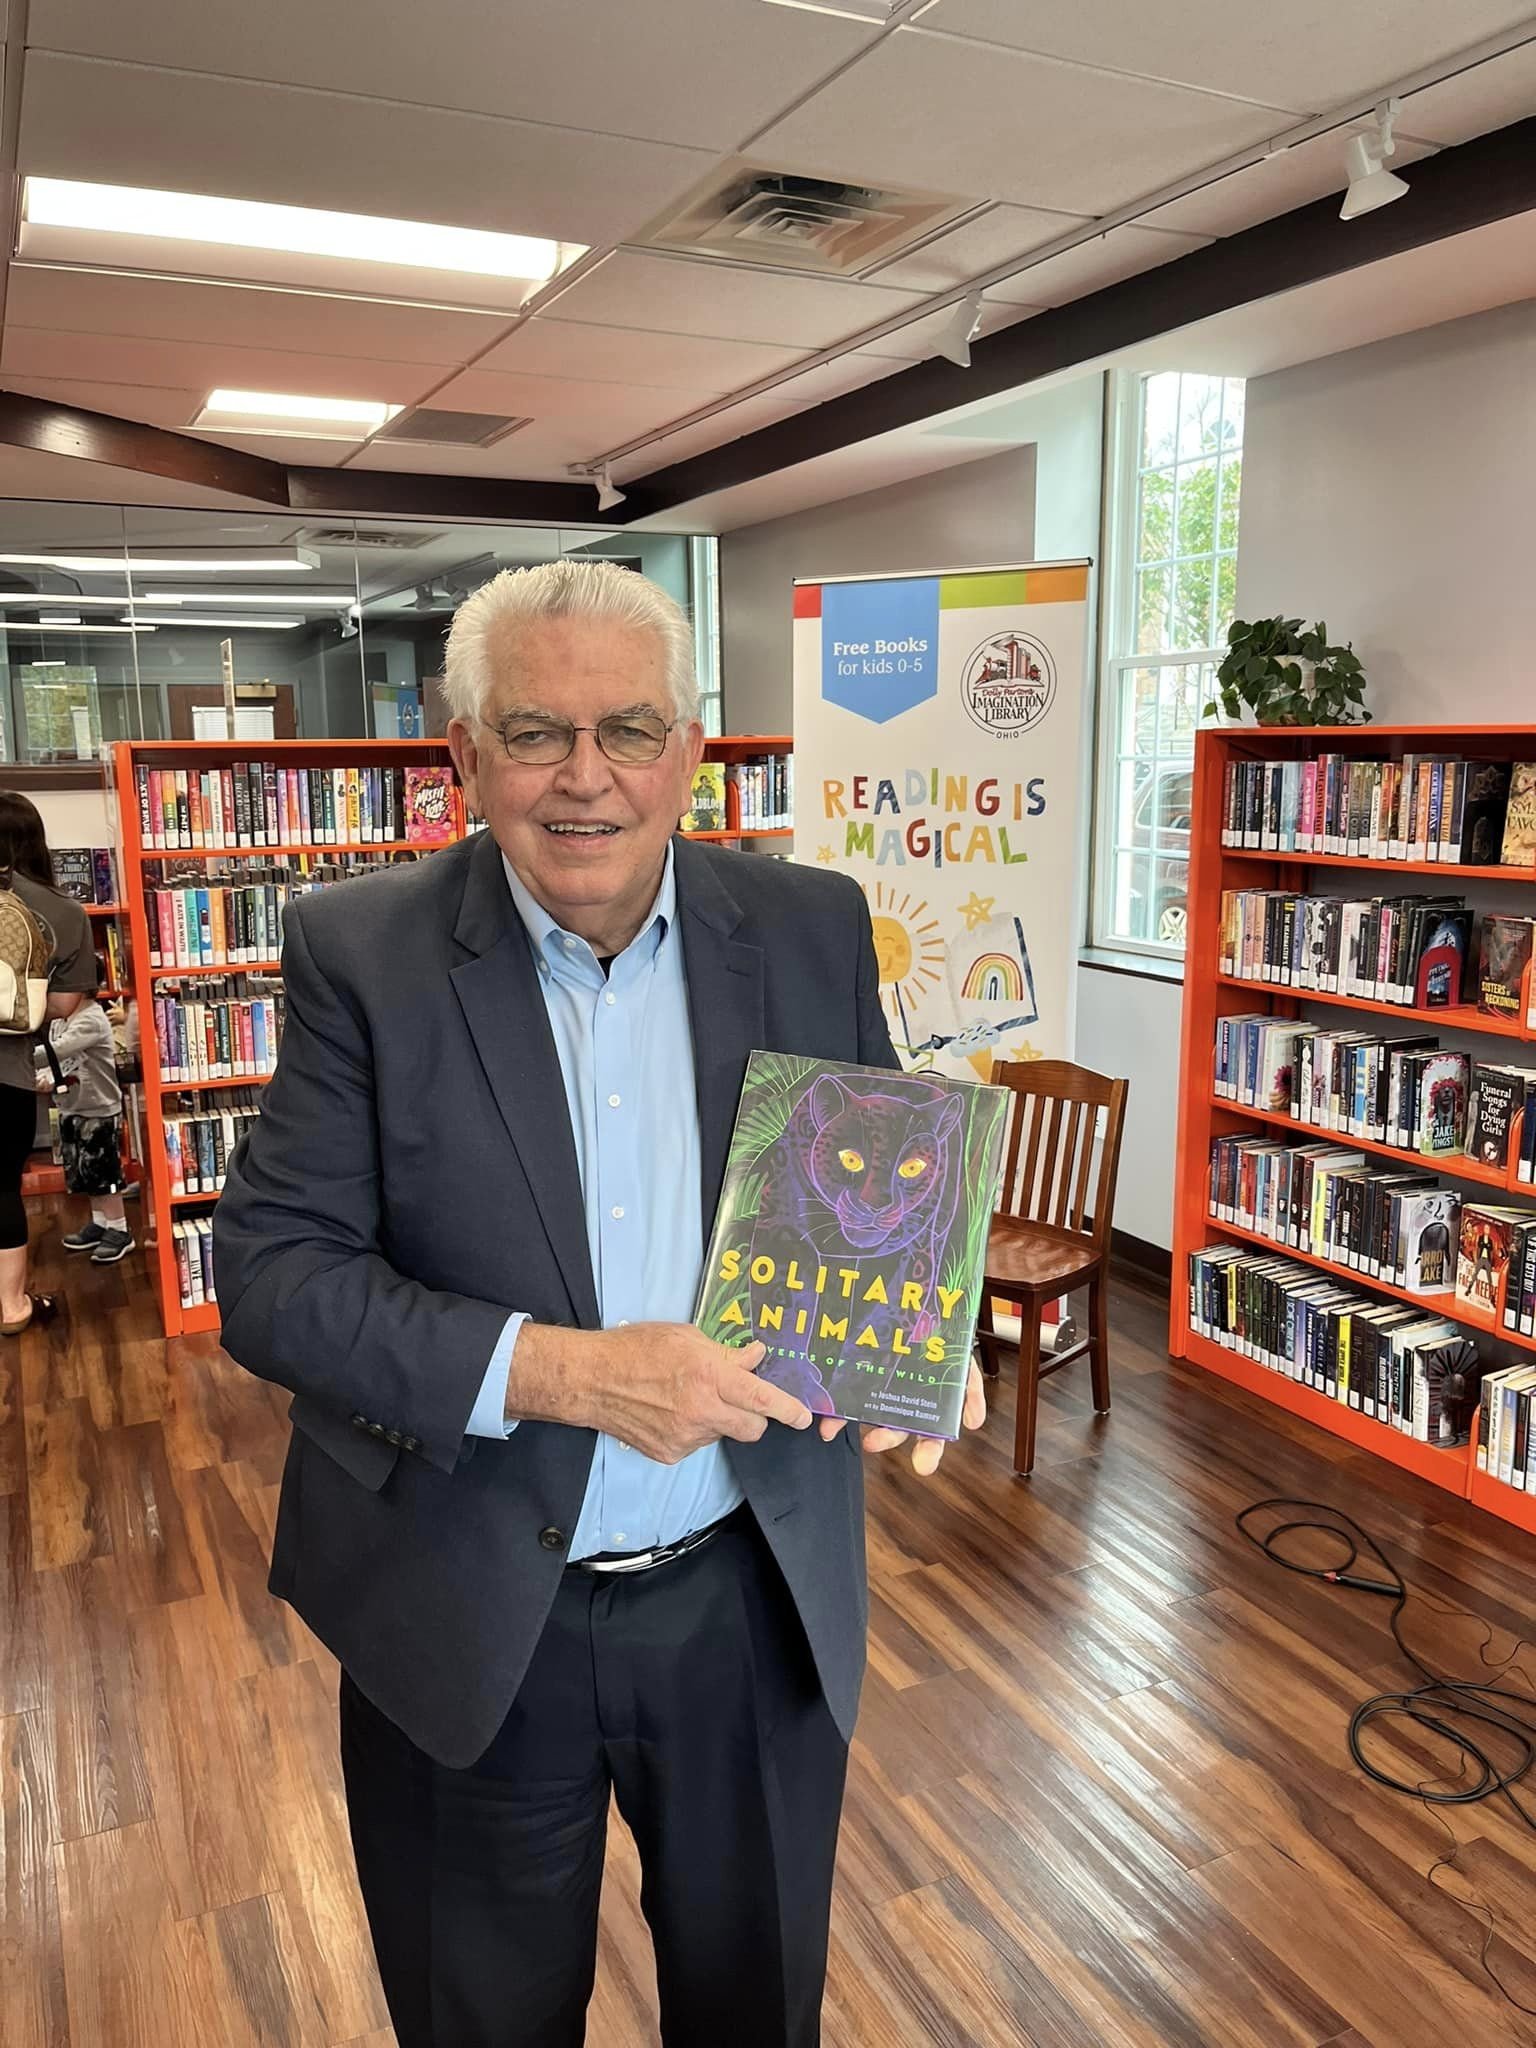   Fairfield County’s local partner, the United Way of Fairfield County, partnered with Fairfield County Commissioner David Levacy, who hosted a book reading and filmed a video about the Imagination Library.  